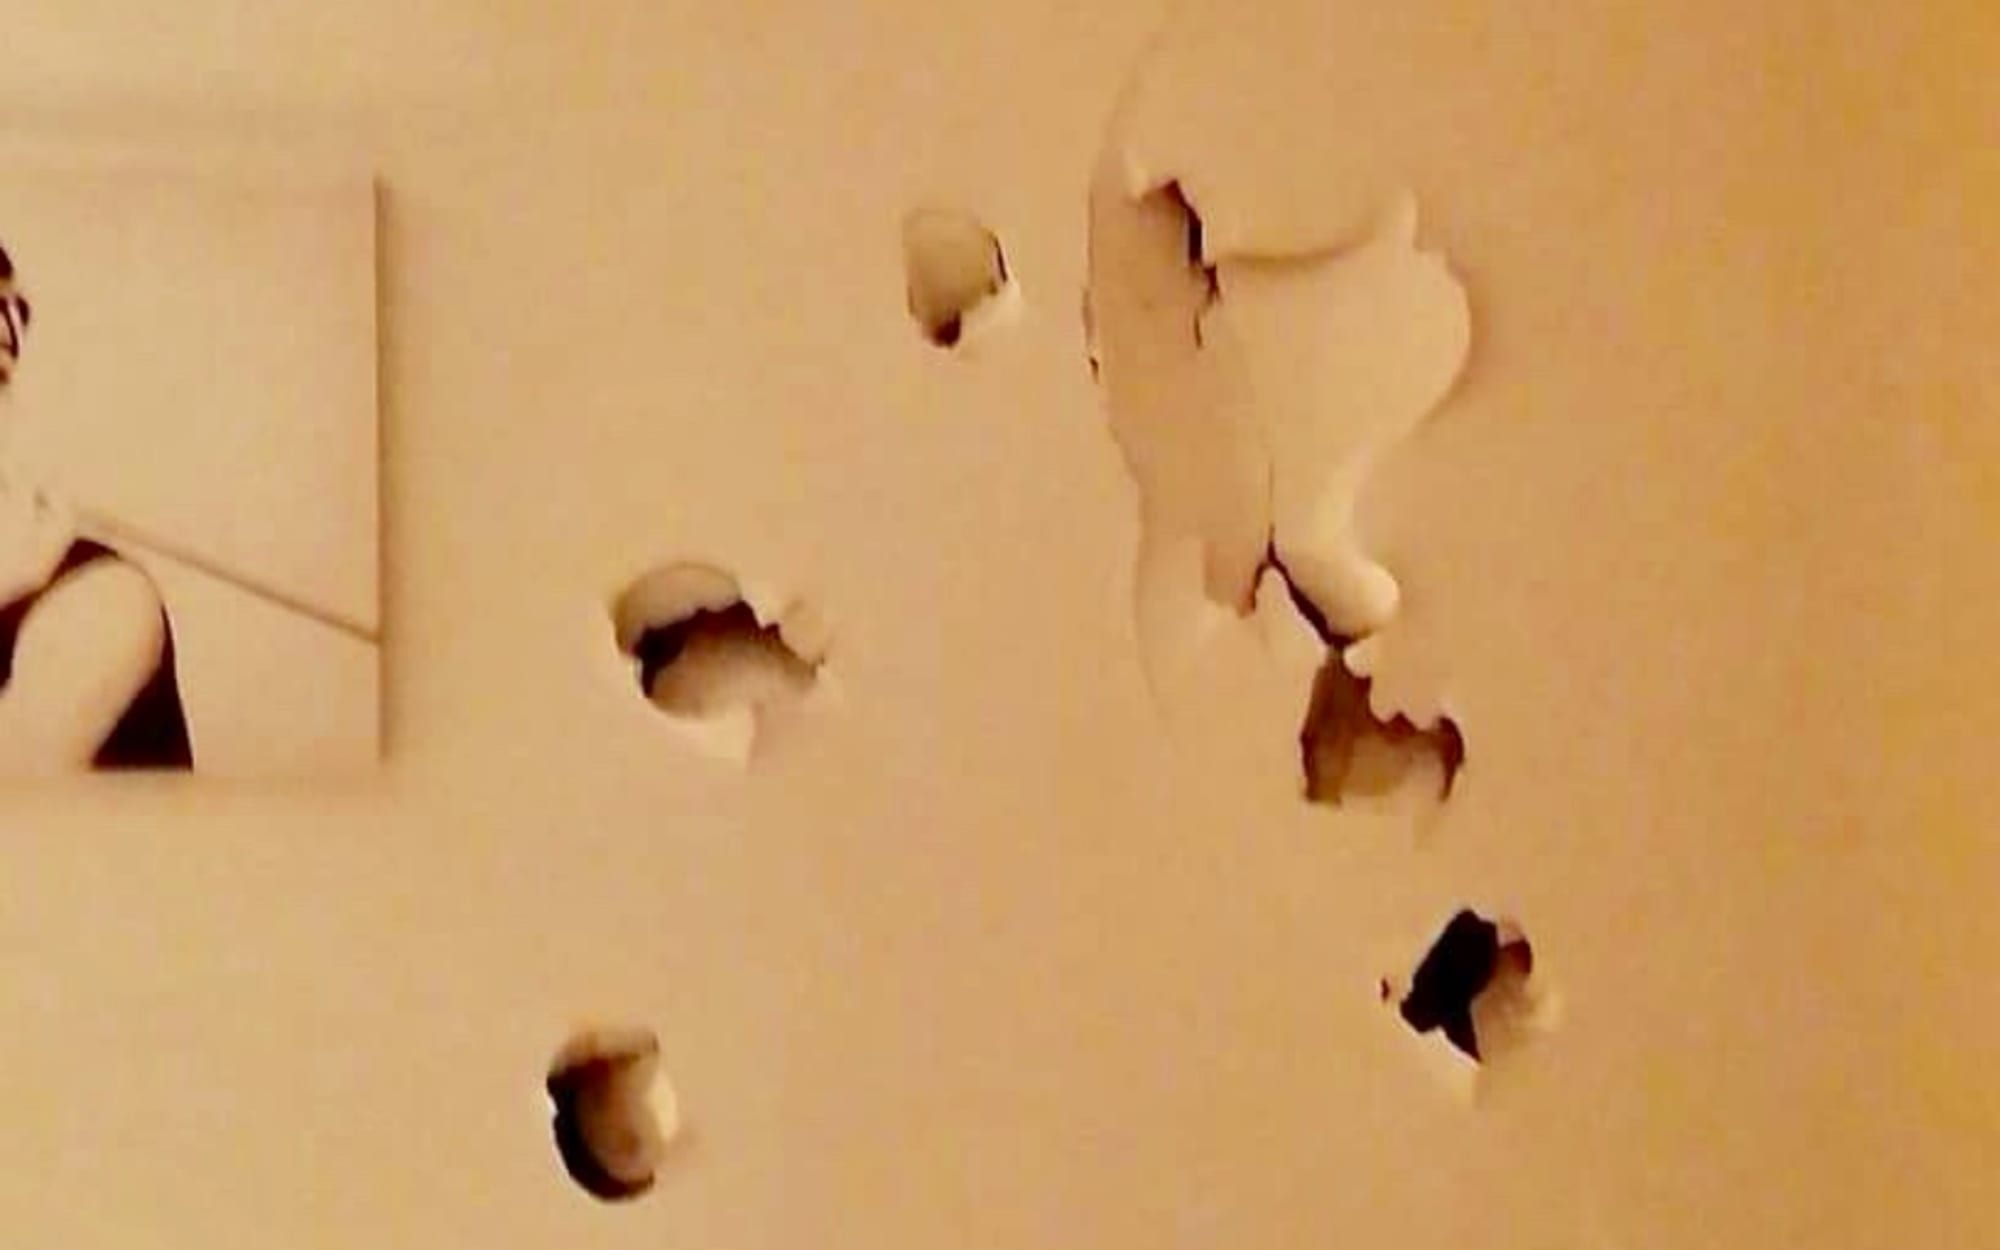 Damage to the walls of a Hillsborough property which Yuliana Desta says was caused by her former partner, ex-All Black Byron Kelleher, during a drunken, violent episode.